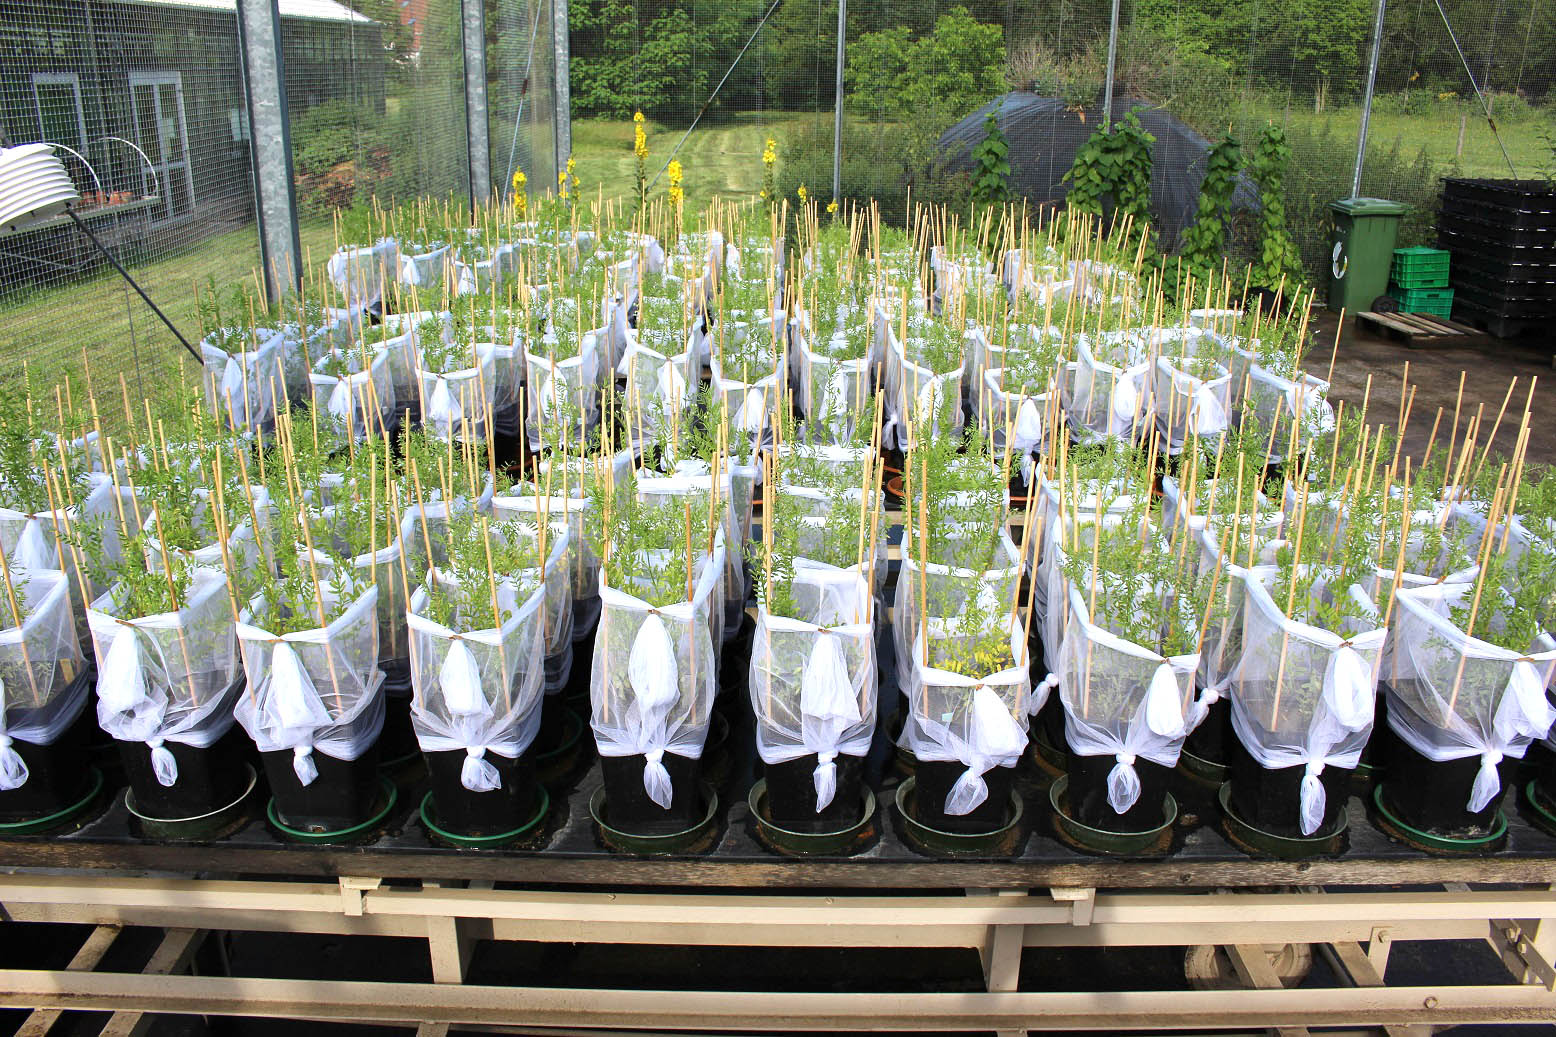 The photos shows many rows with pots in which lentil plants are grown.